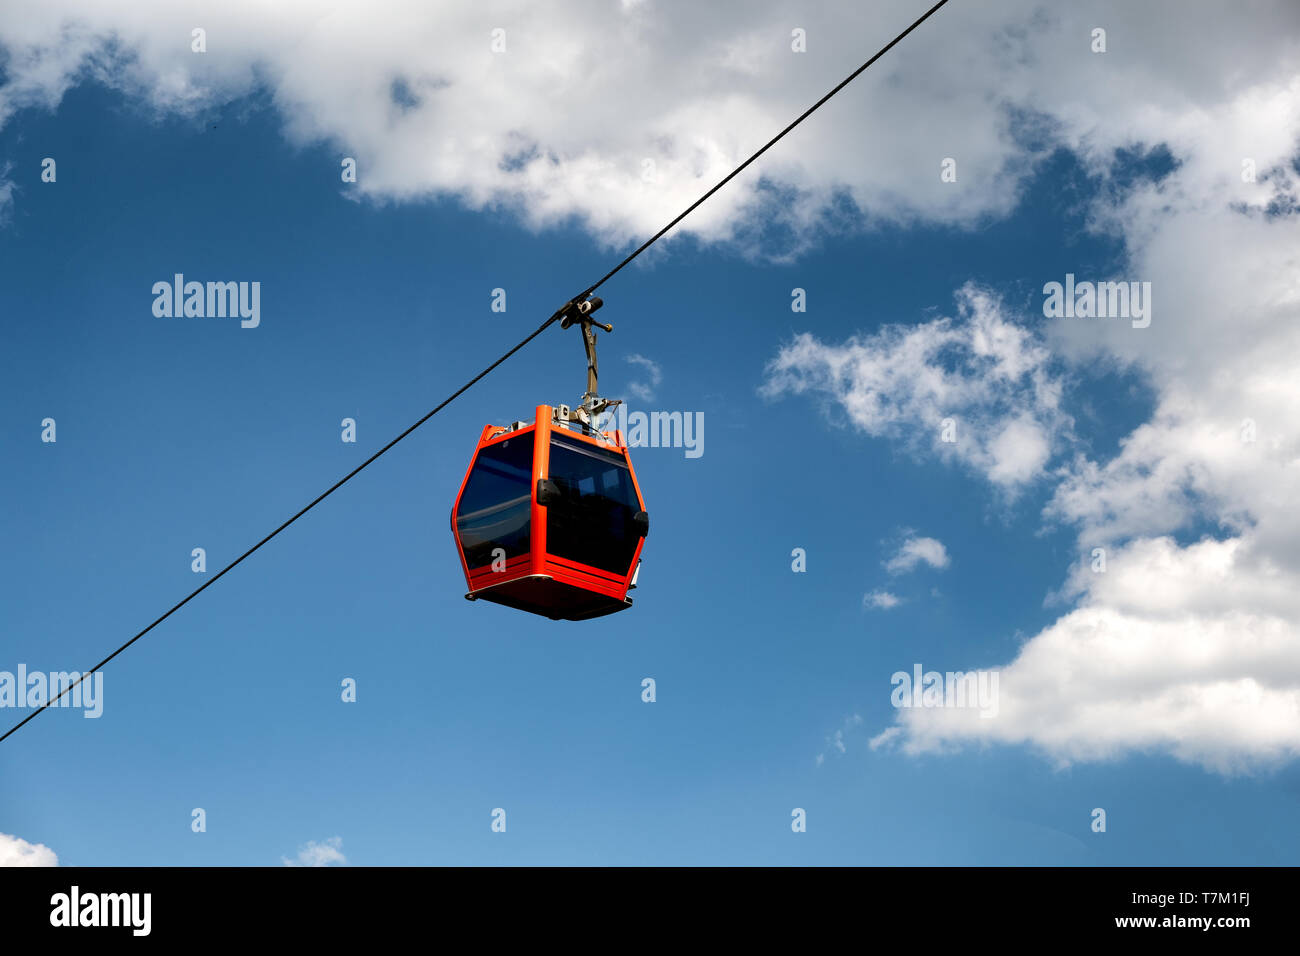 Single red cable car on cableway isolated on blue sky, overhead cableway car of Pohorska vzpenjaca in Maribor, Slovenia Stock Photo